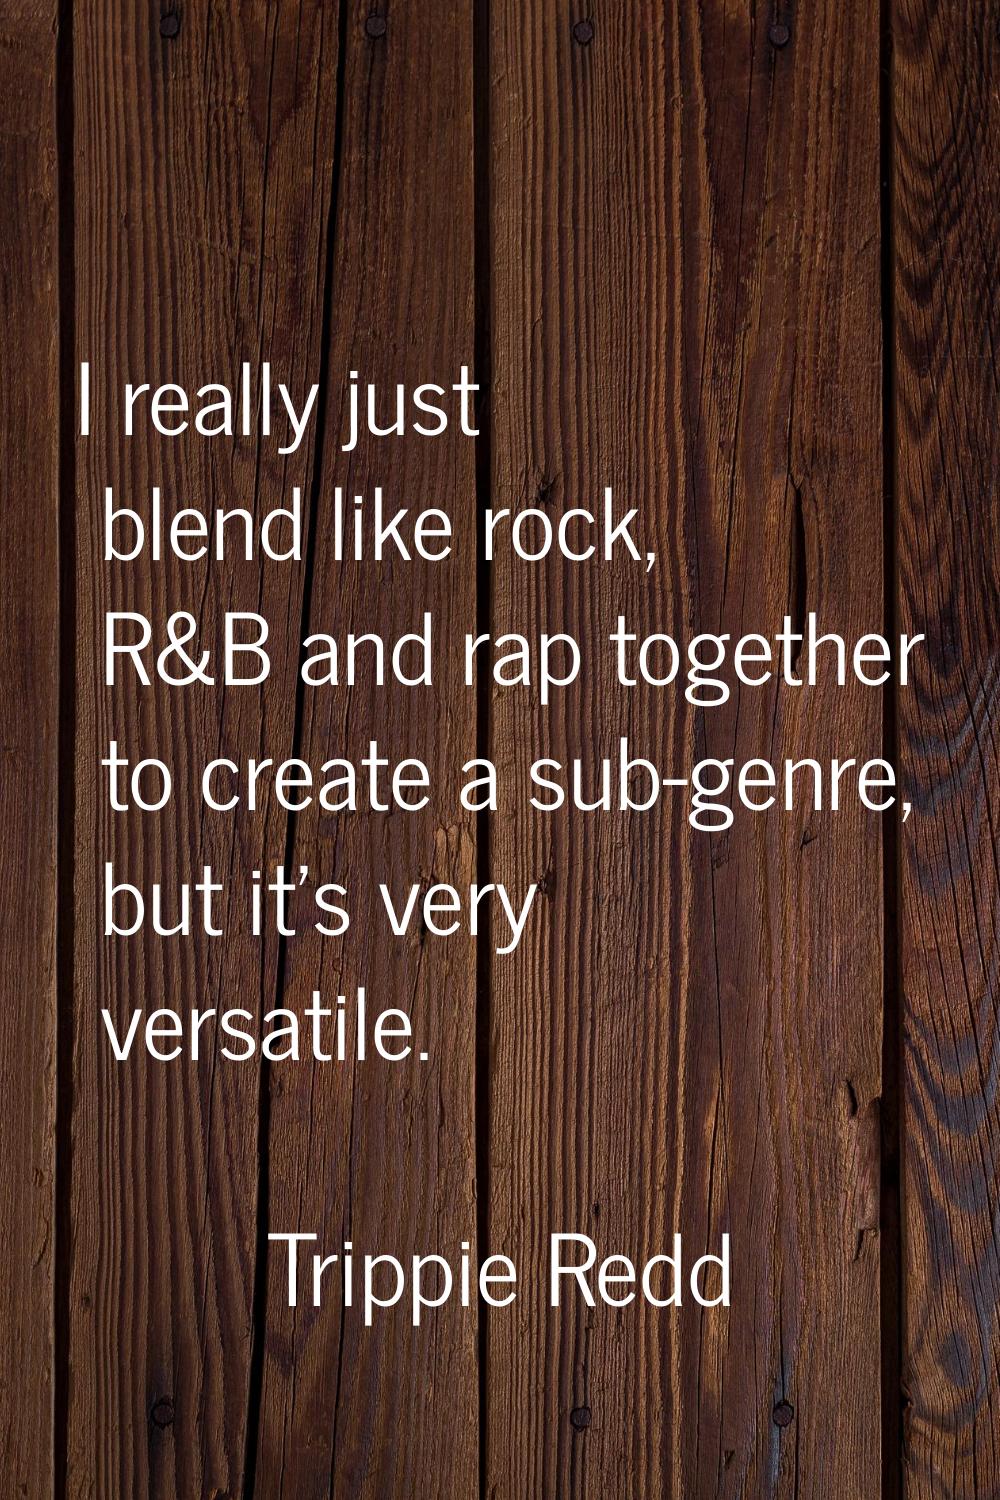 I really just blend like rock, R&B and rap together to create a sub-genre, but it's very versatile.